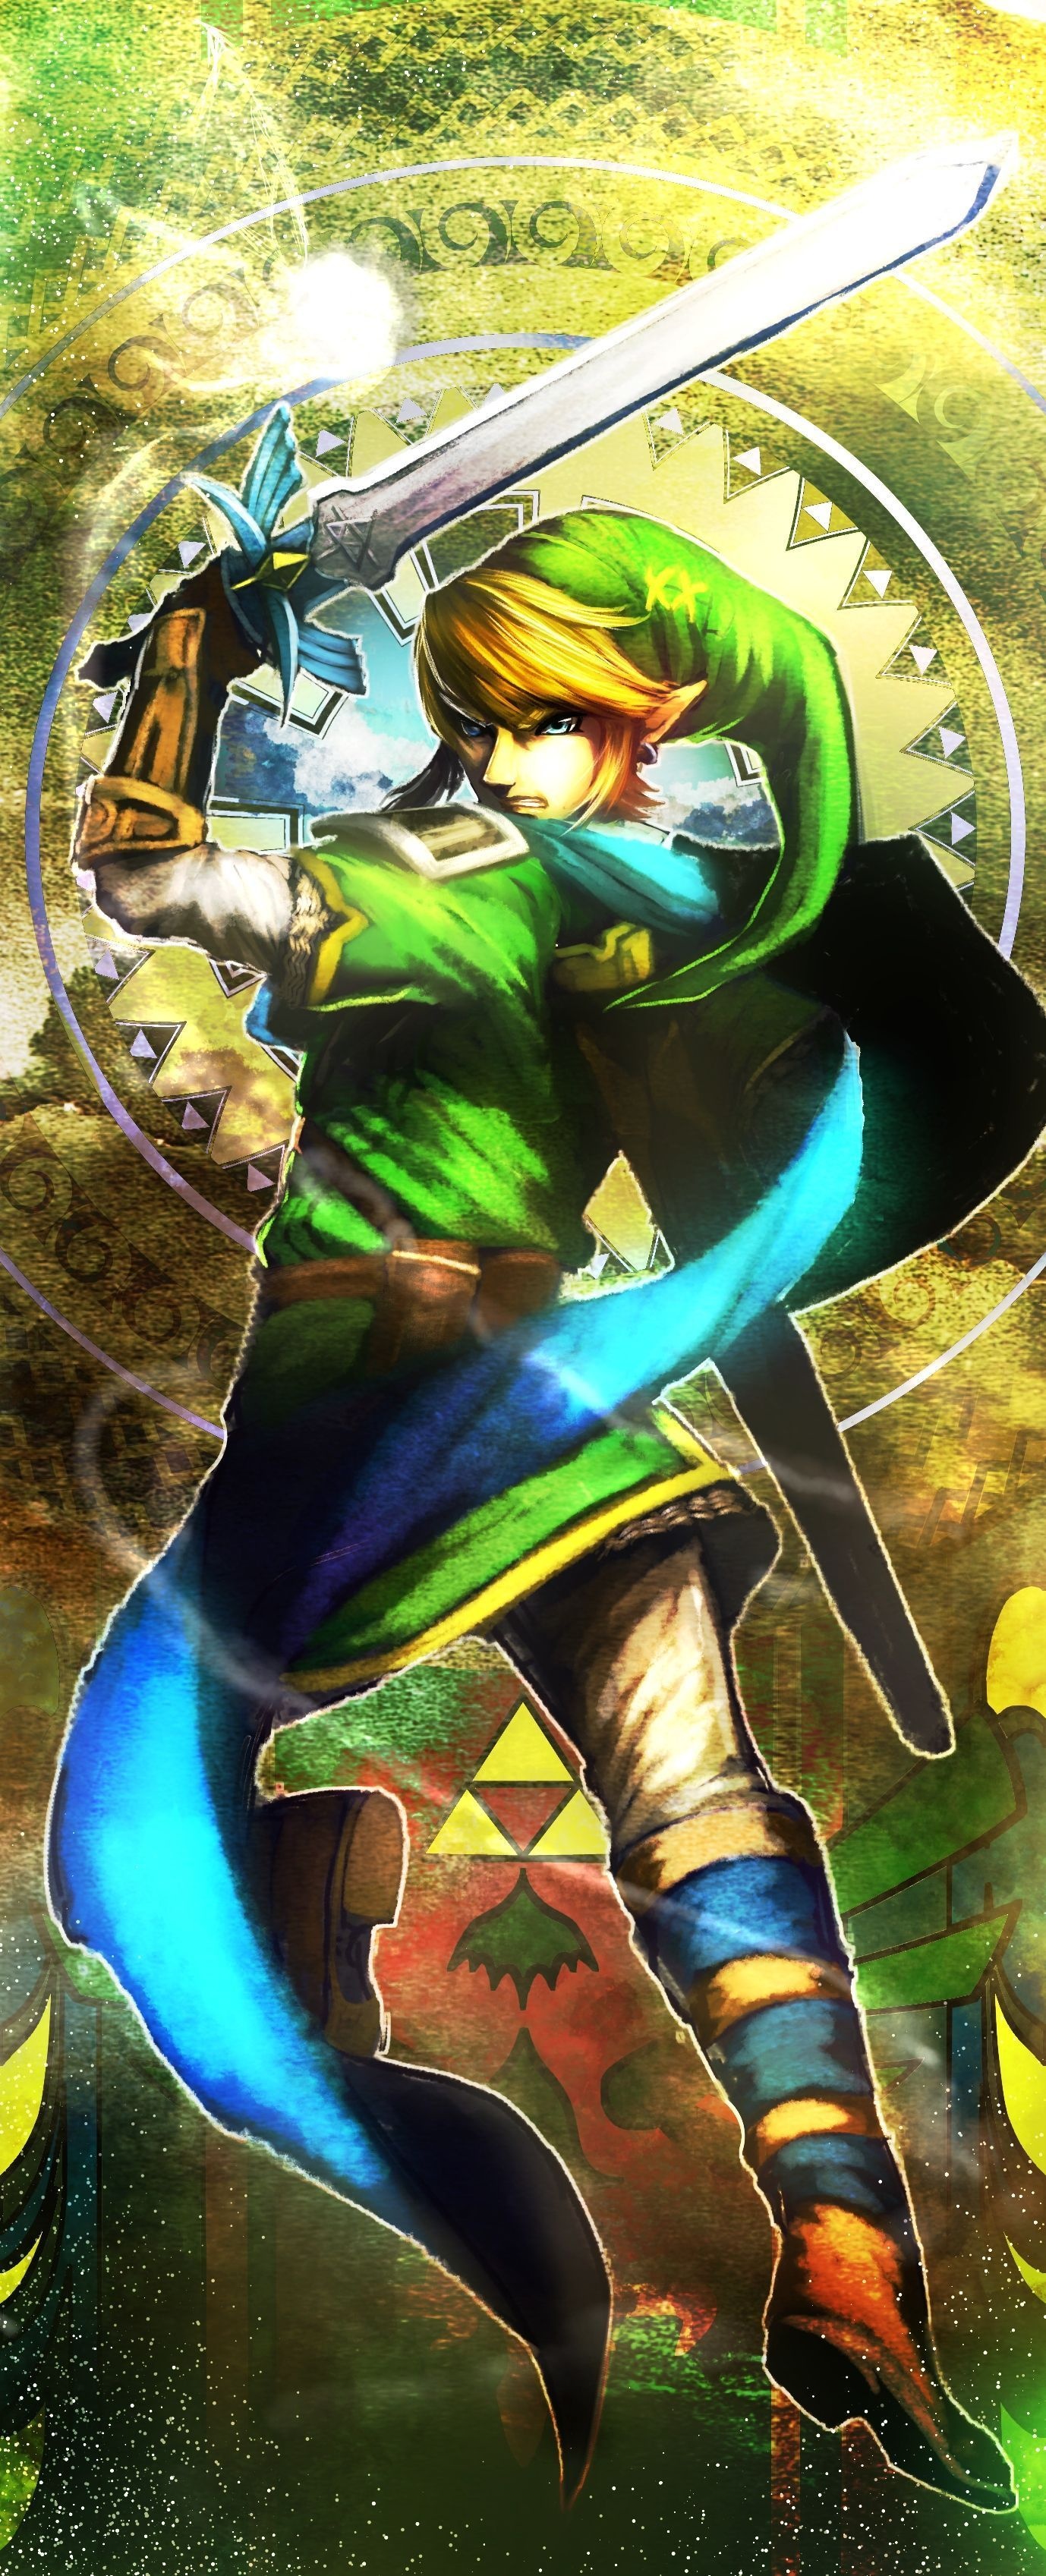 Hyrule Warriors, iPhone wallpapers, Mobile gaming beauty, 1380x3400 HD Handy